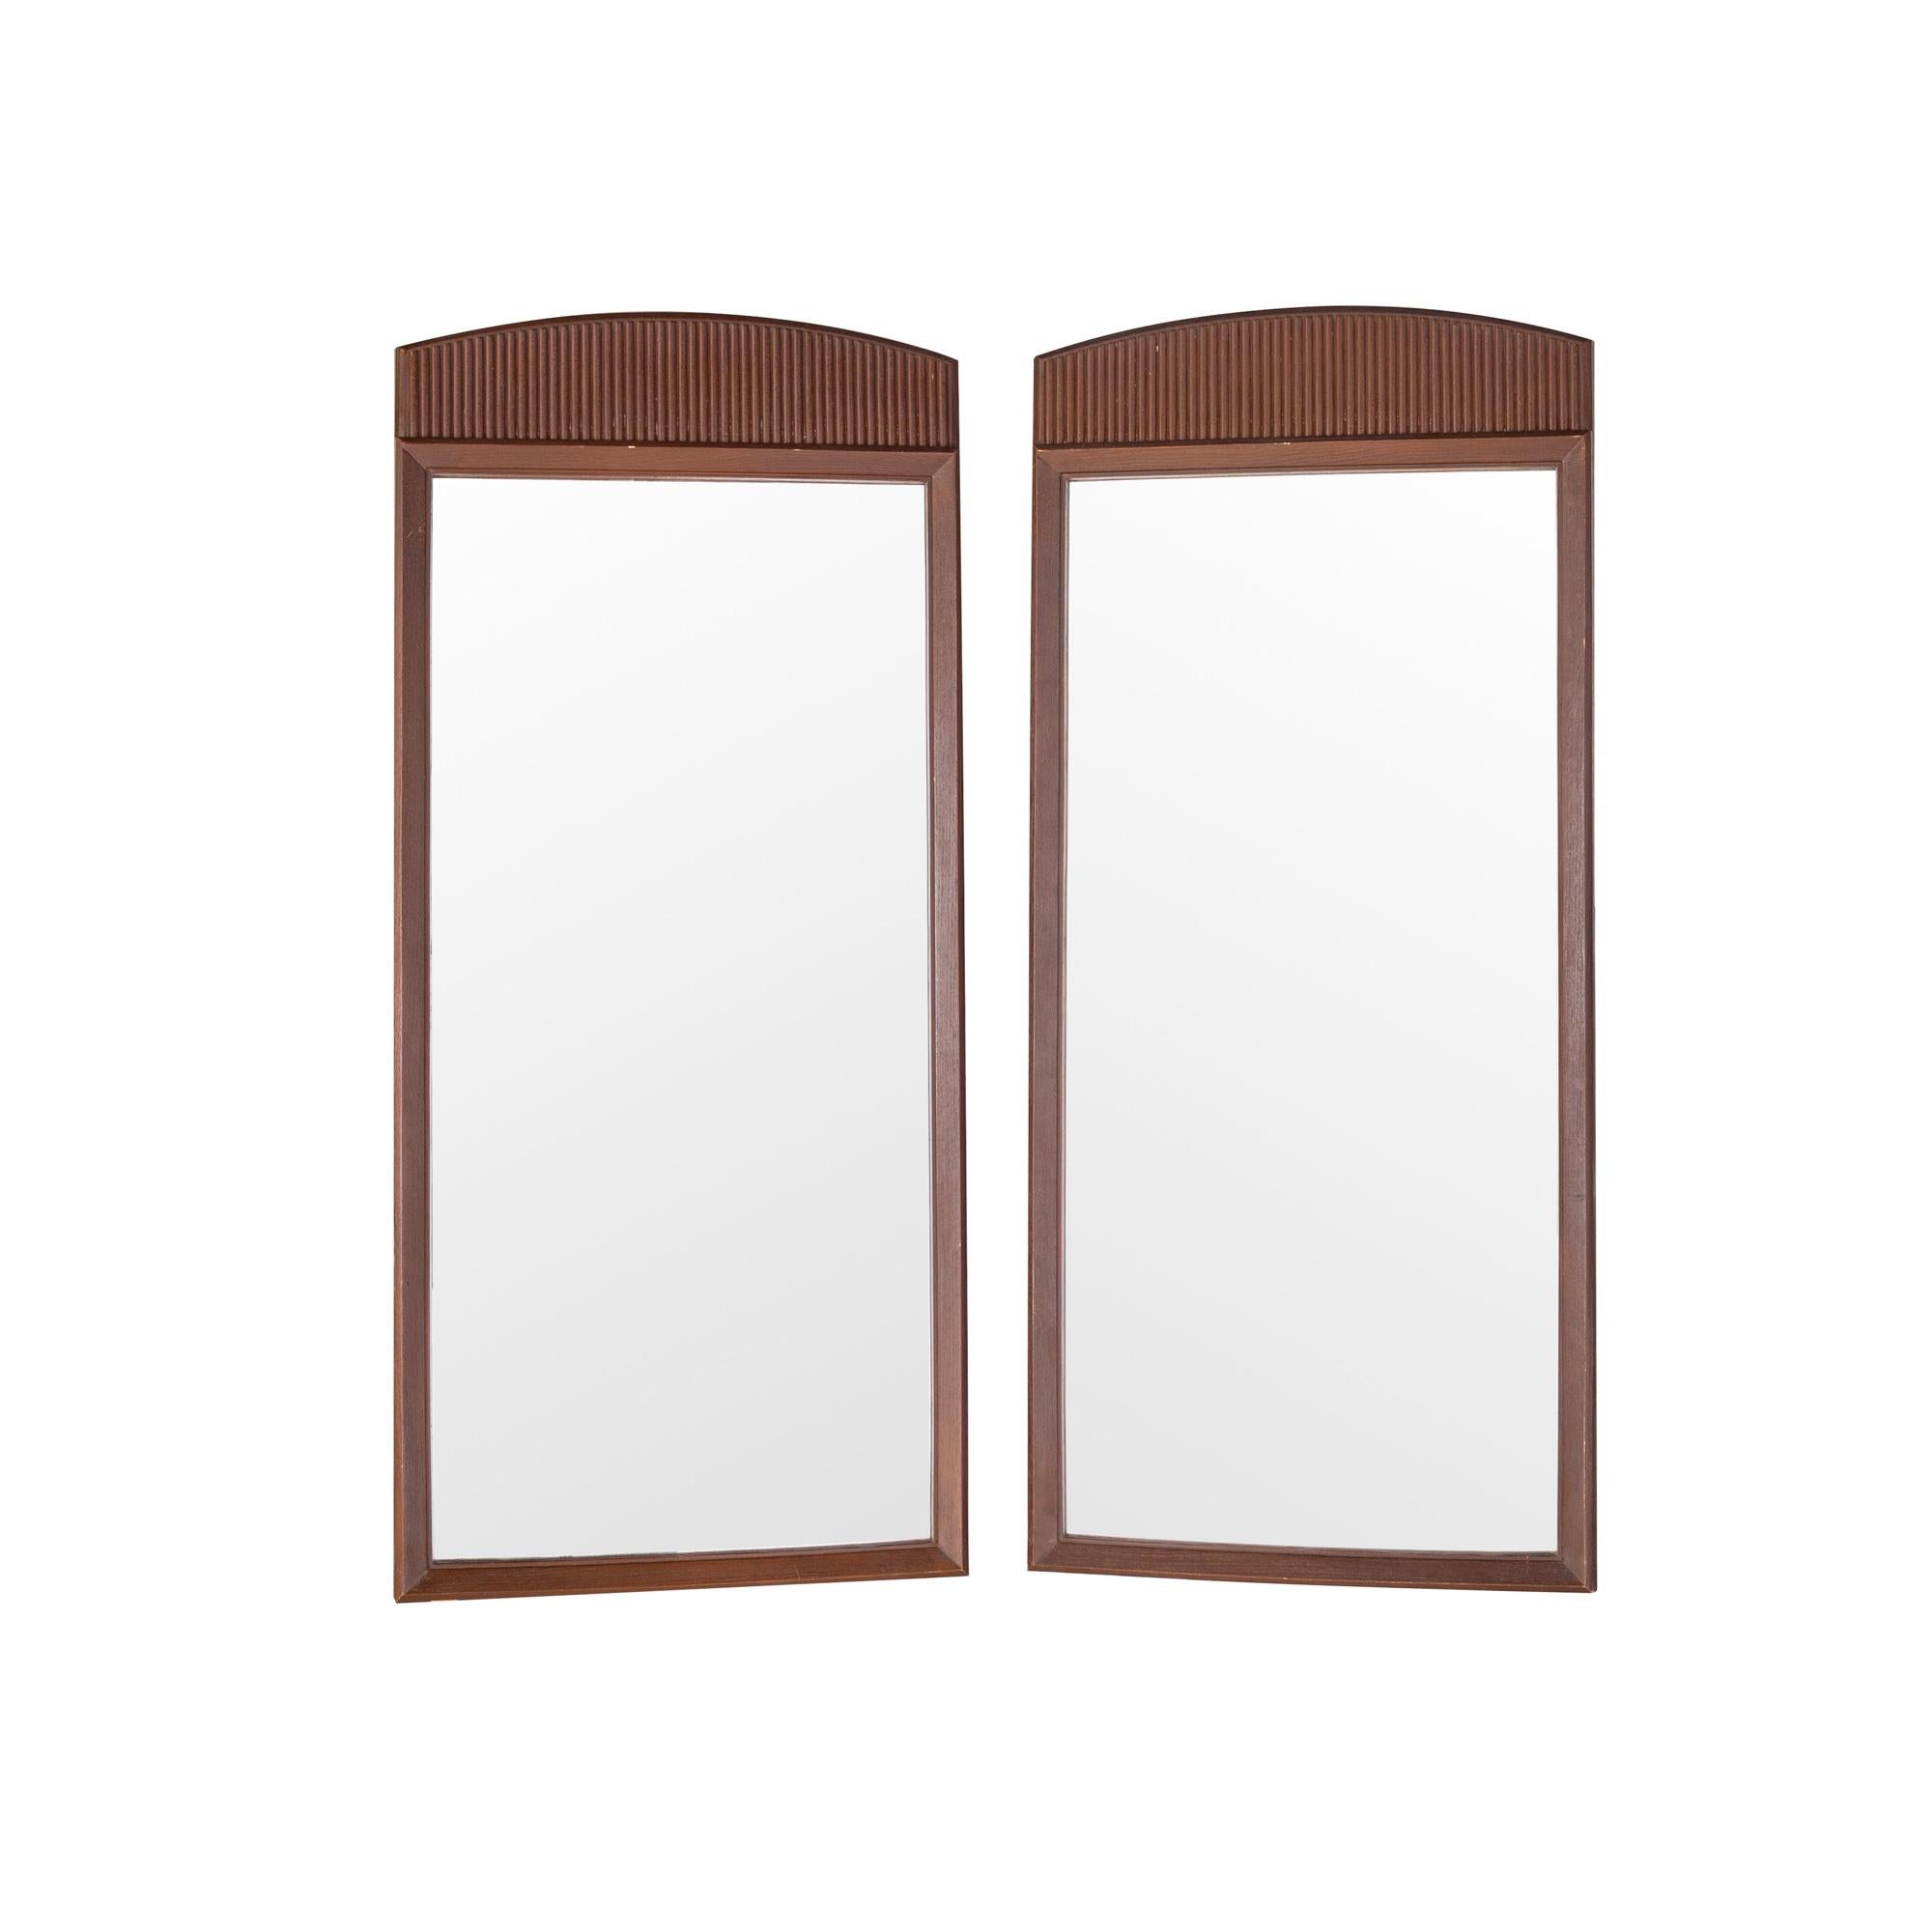 Lane First Edition mid century walnut mirror - a pair

Each mirror measures: 20 wide x 2 deep x 67.5 inches high

This piece is available in what we call Restored Vintage Condition. Upon purchase it is thoroughly cleaned and minor repairs are